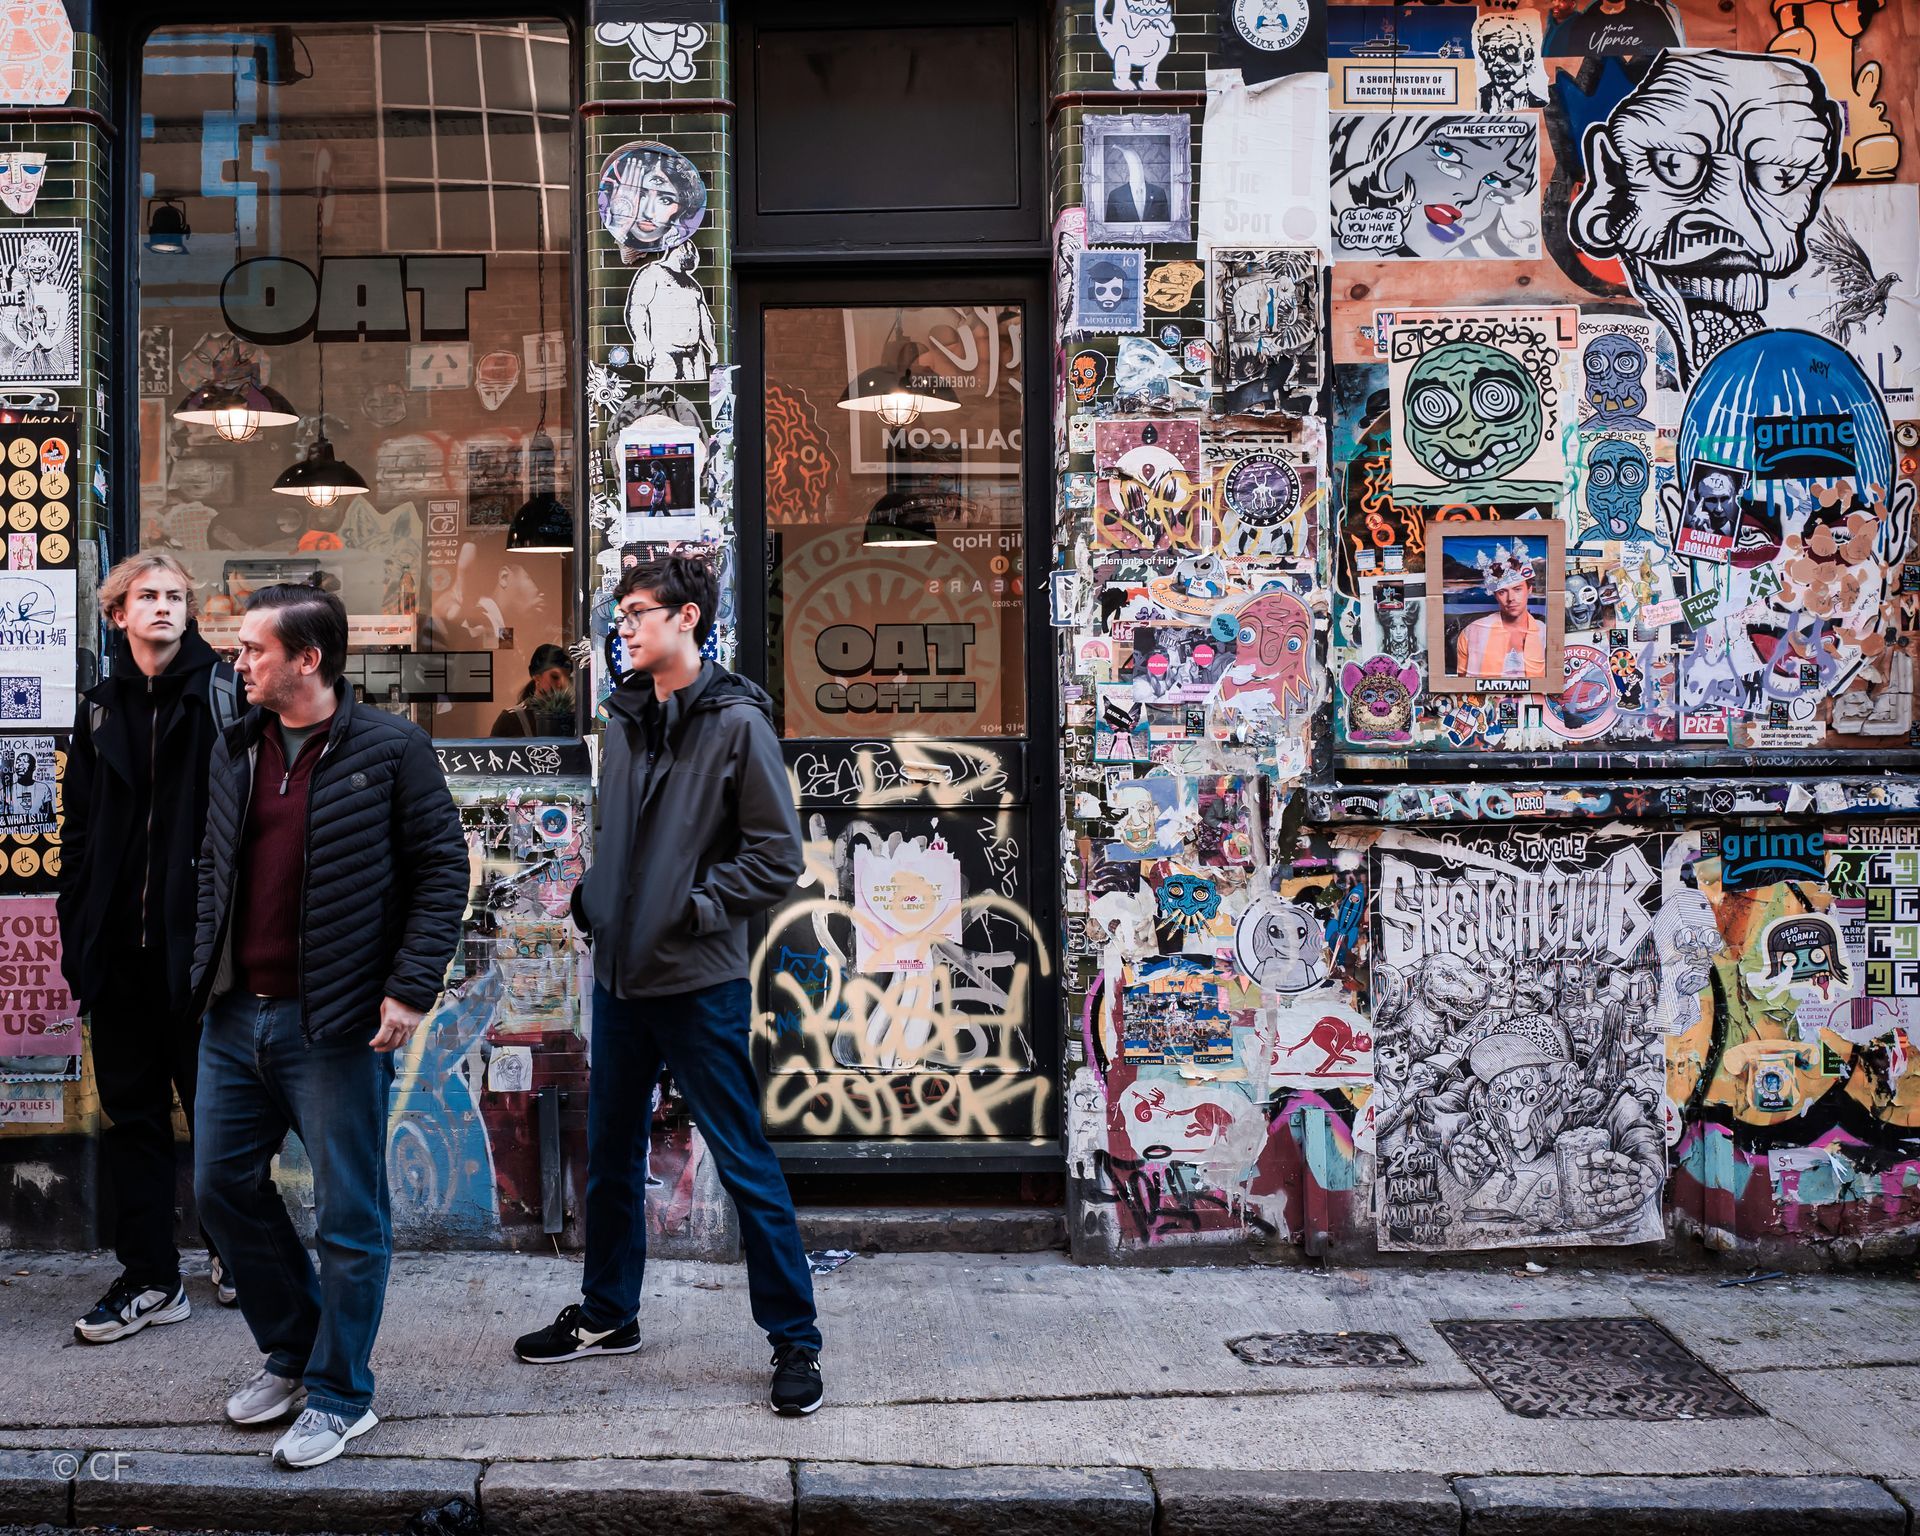 Three men are walking down a street in front of a building with graffiti on it.